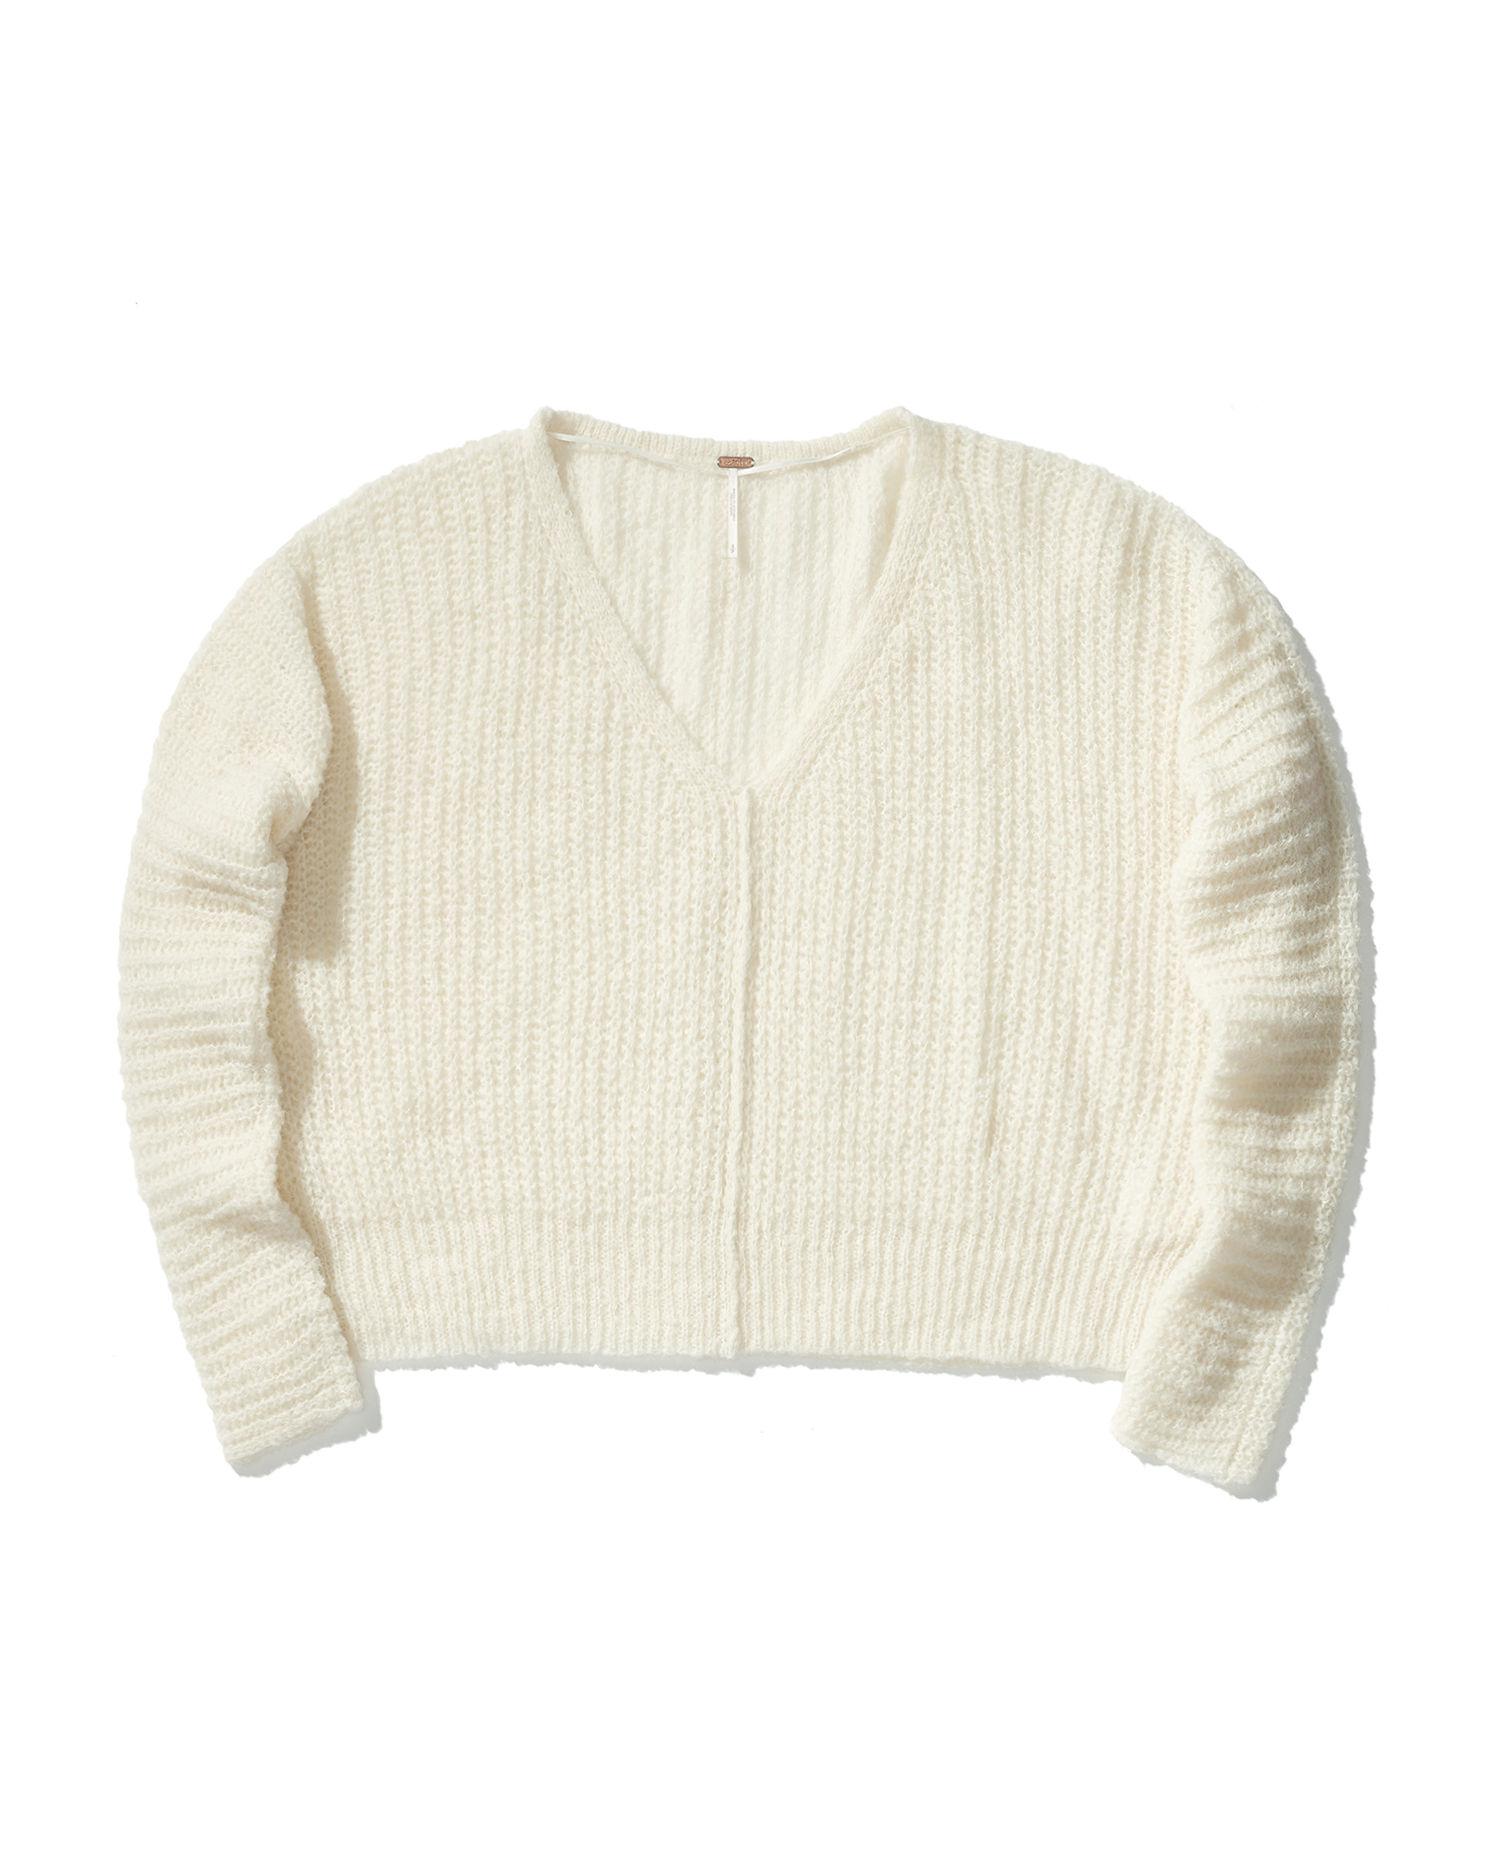 Oversized knit sweater by FREE PEOPLE